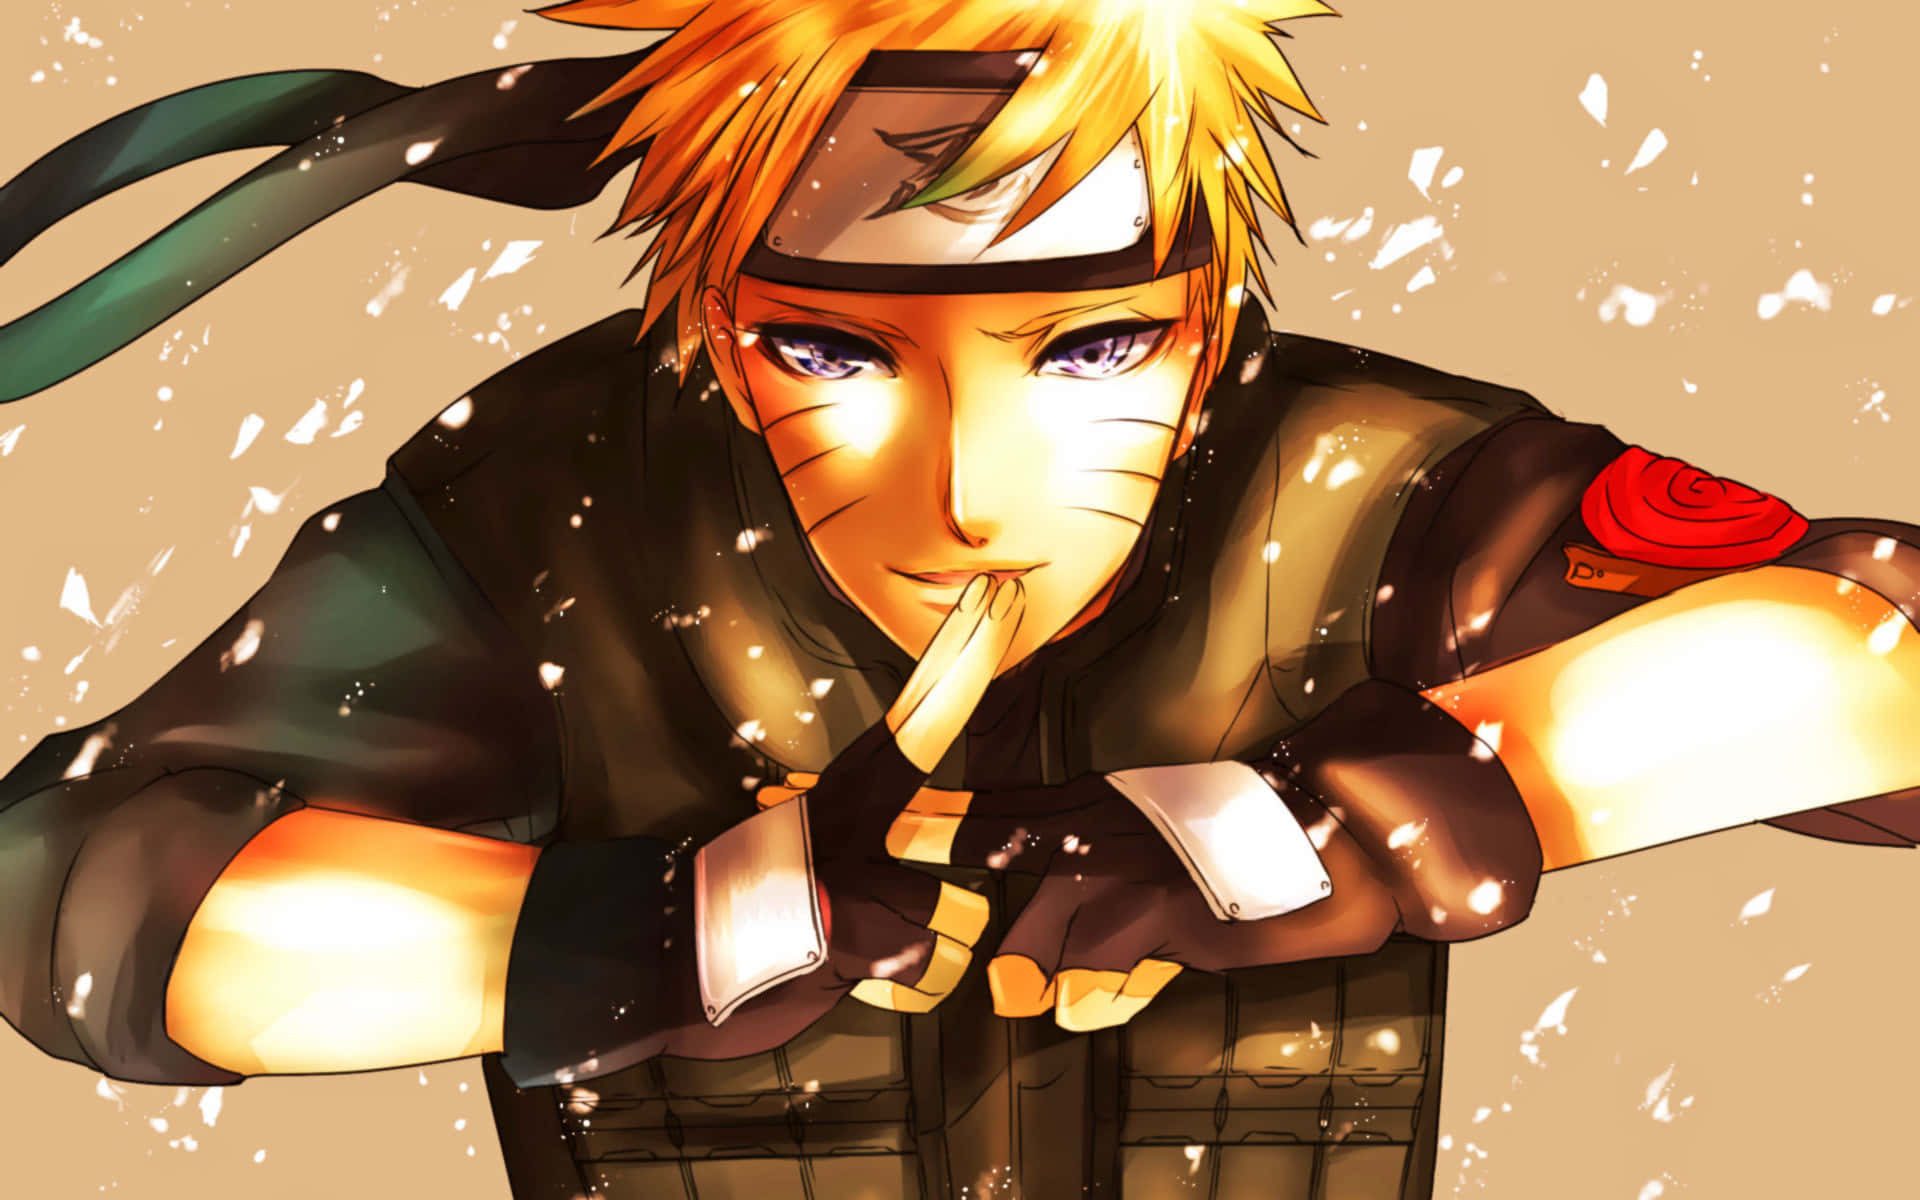 Join Naruto In His Epic Journey To Become A Ninja!